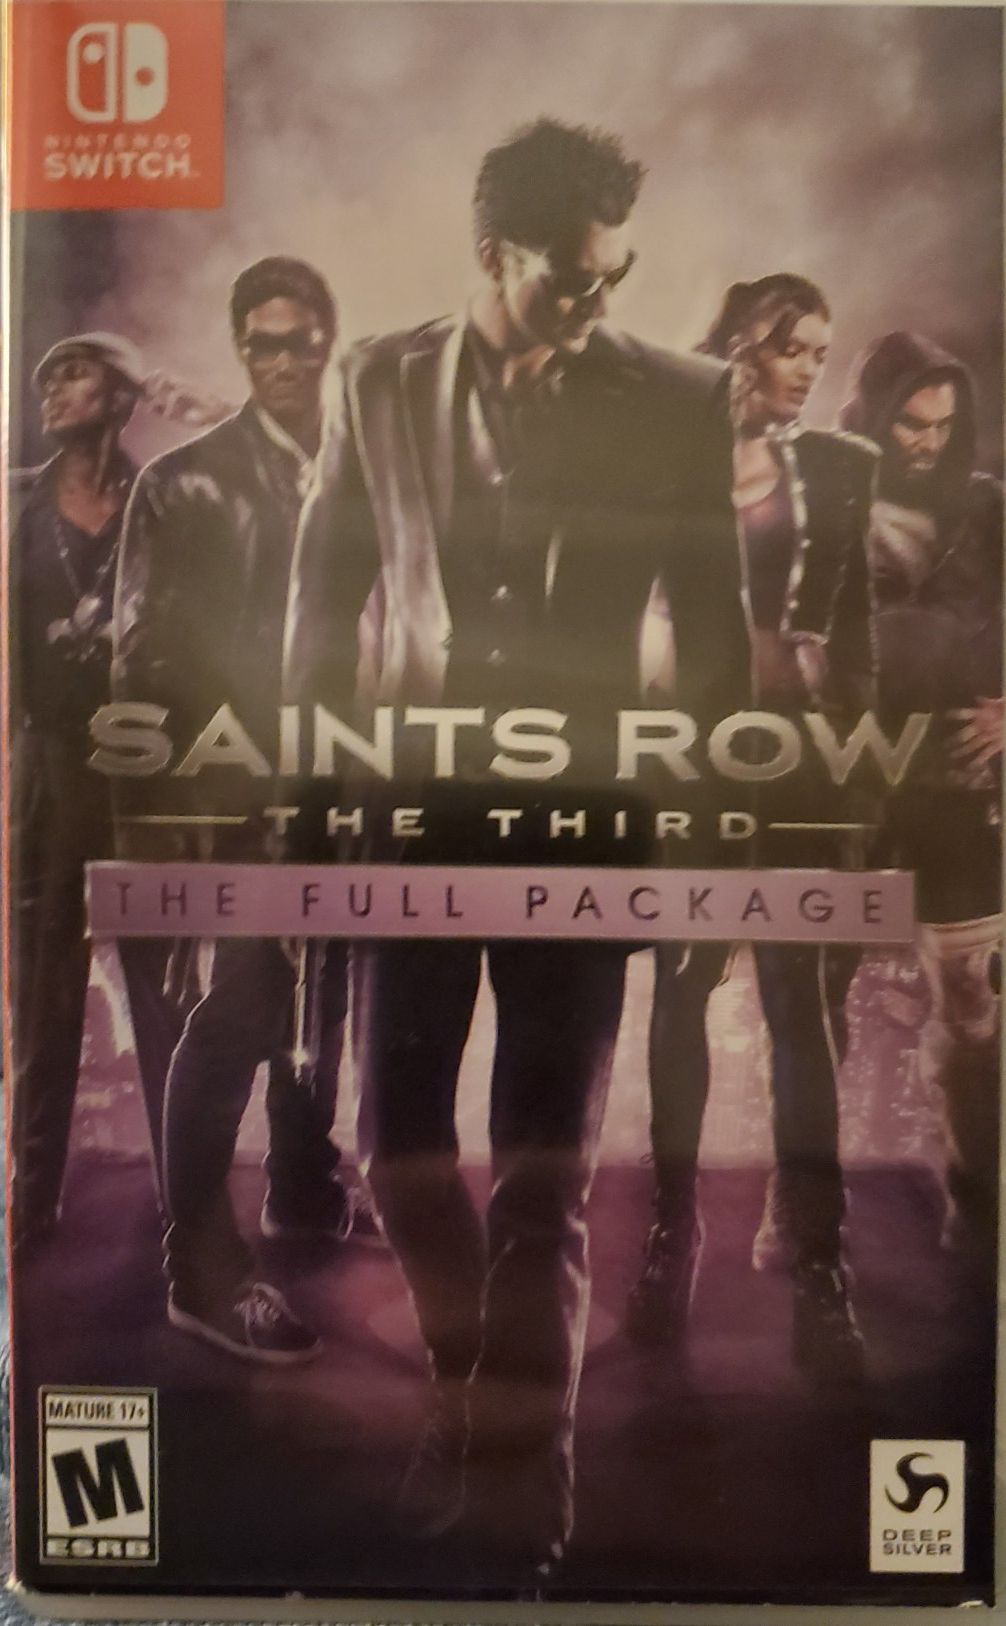 Nintendo Switch - Saints Row The Third: The Full Package